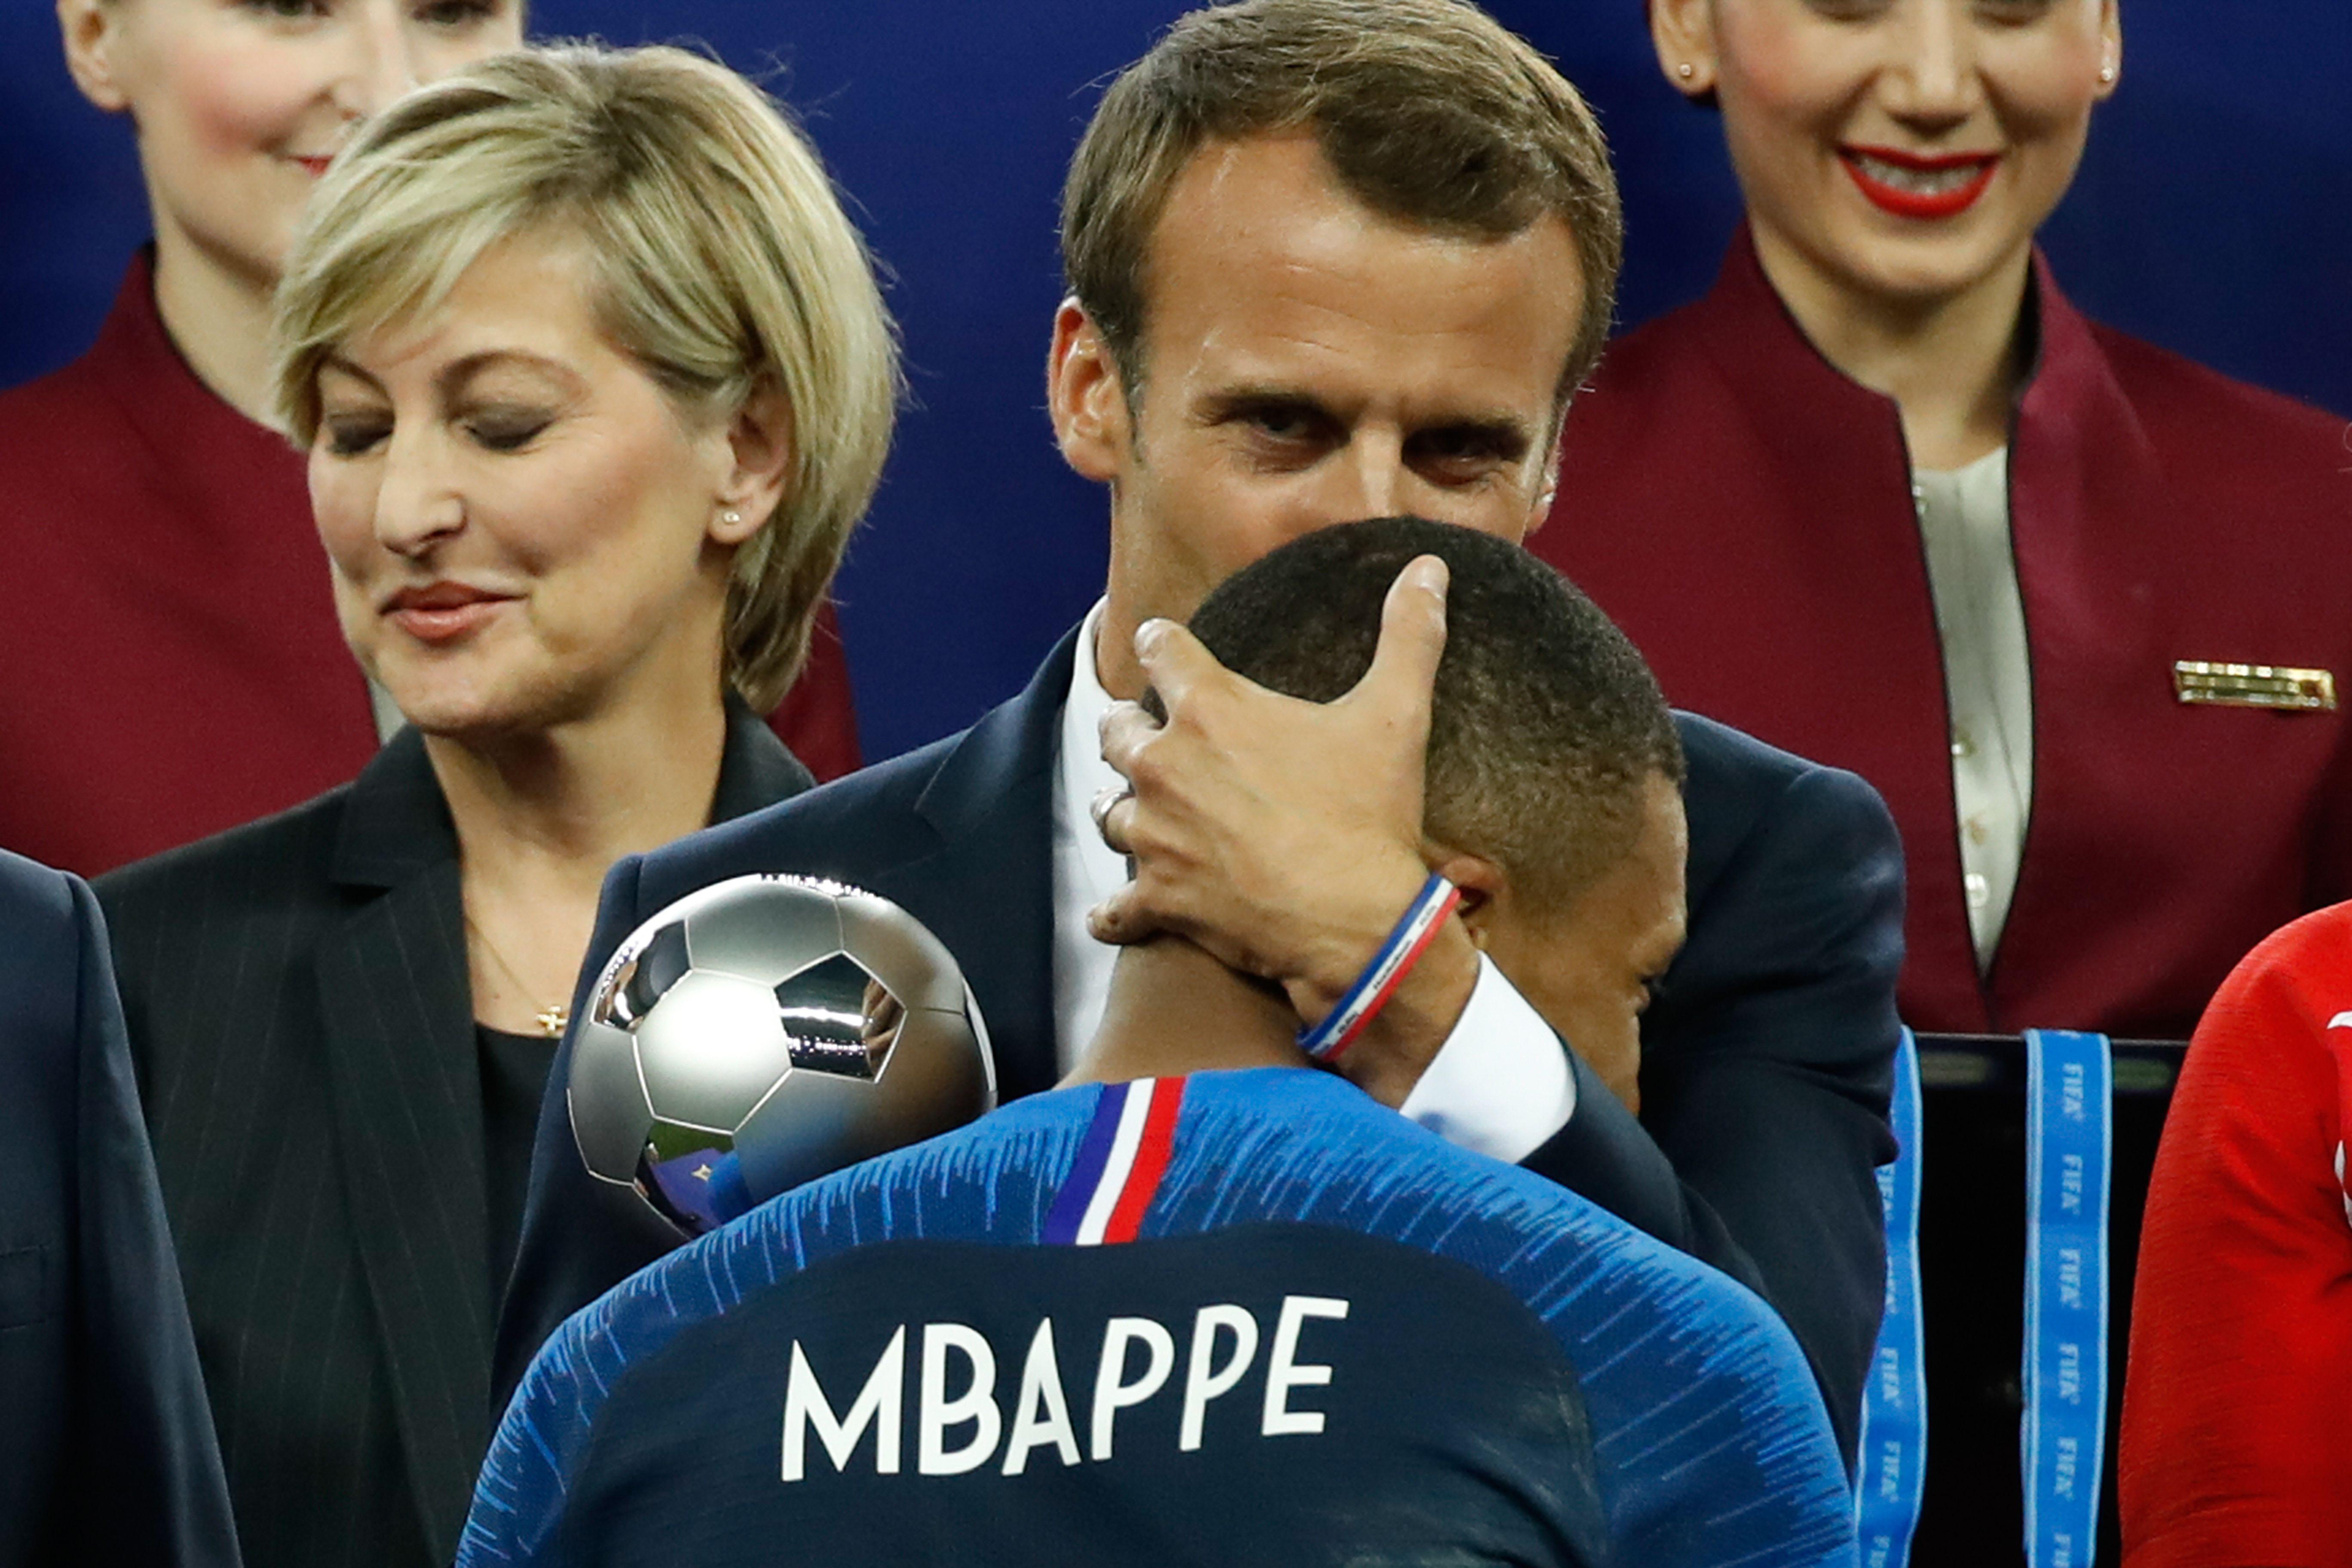 France's forward Kylian Mbappe receives the silver ball for best young player from French President Emmanuel Macron during the medals ceremony after the Russia 2018 World Cup final football match between France and Croatia at the Luzhniki Stadium in Moscow on July 15, 2018. 